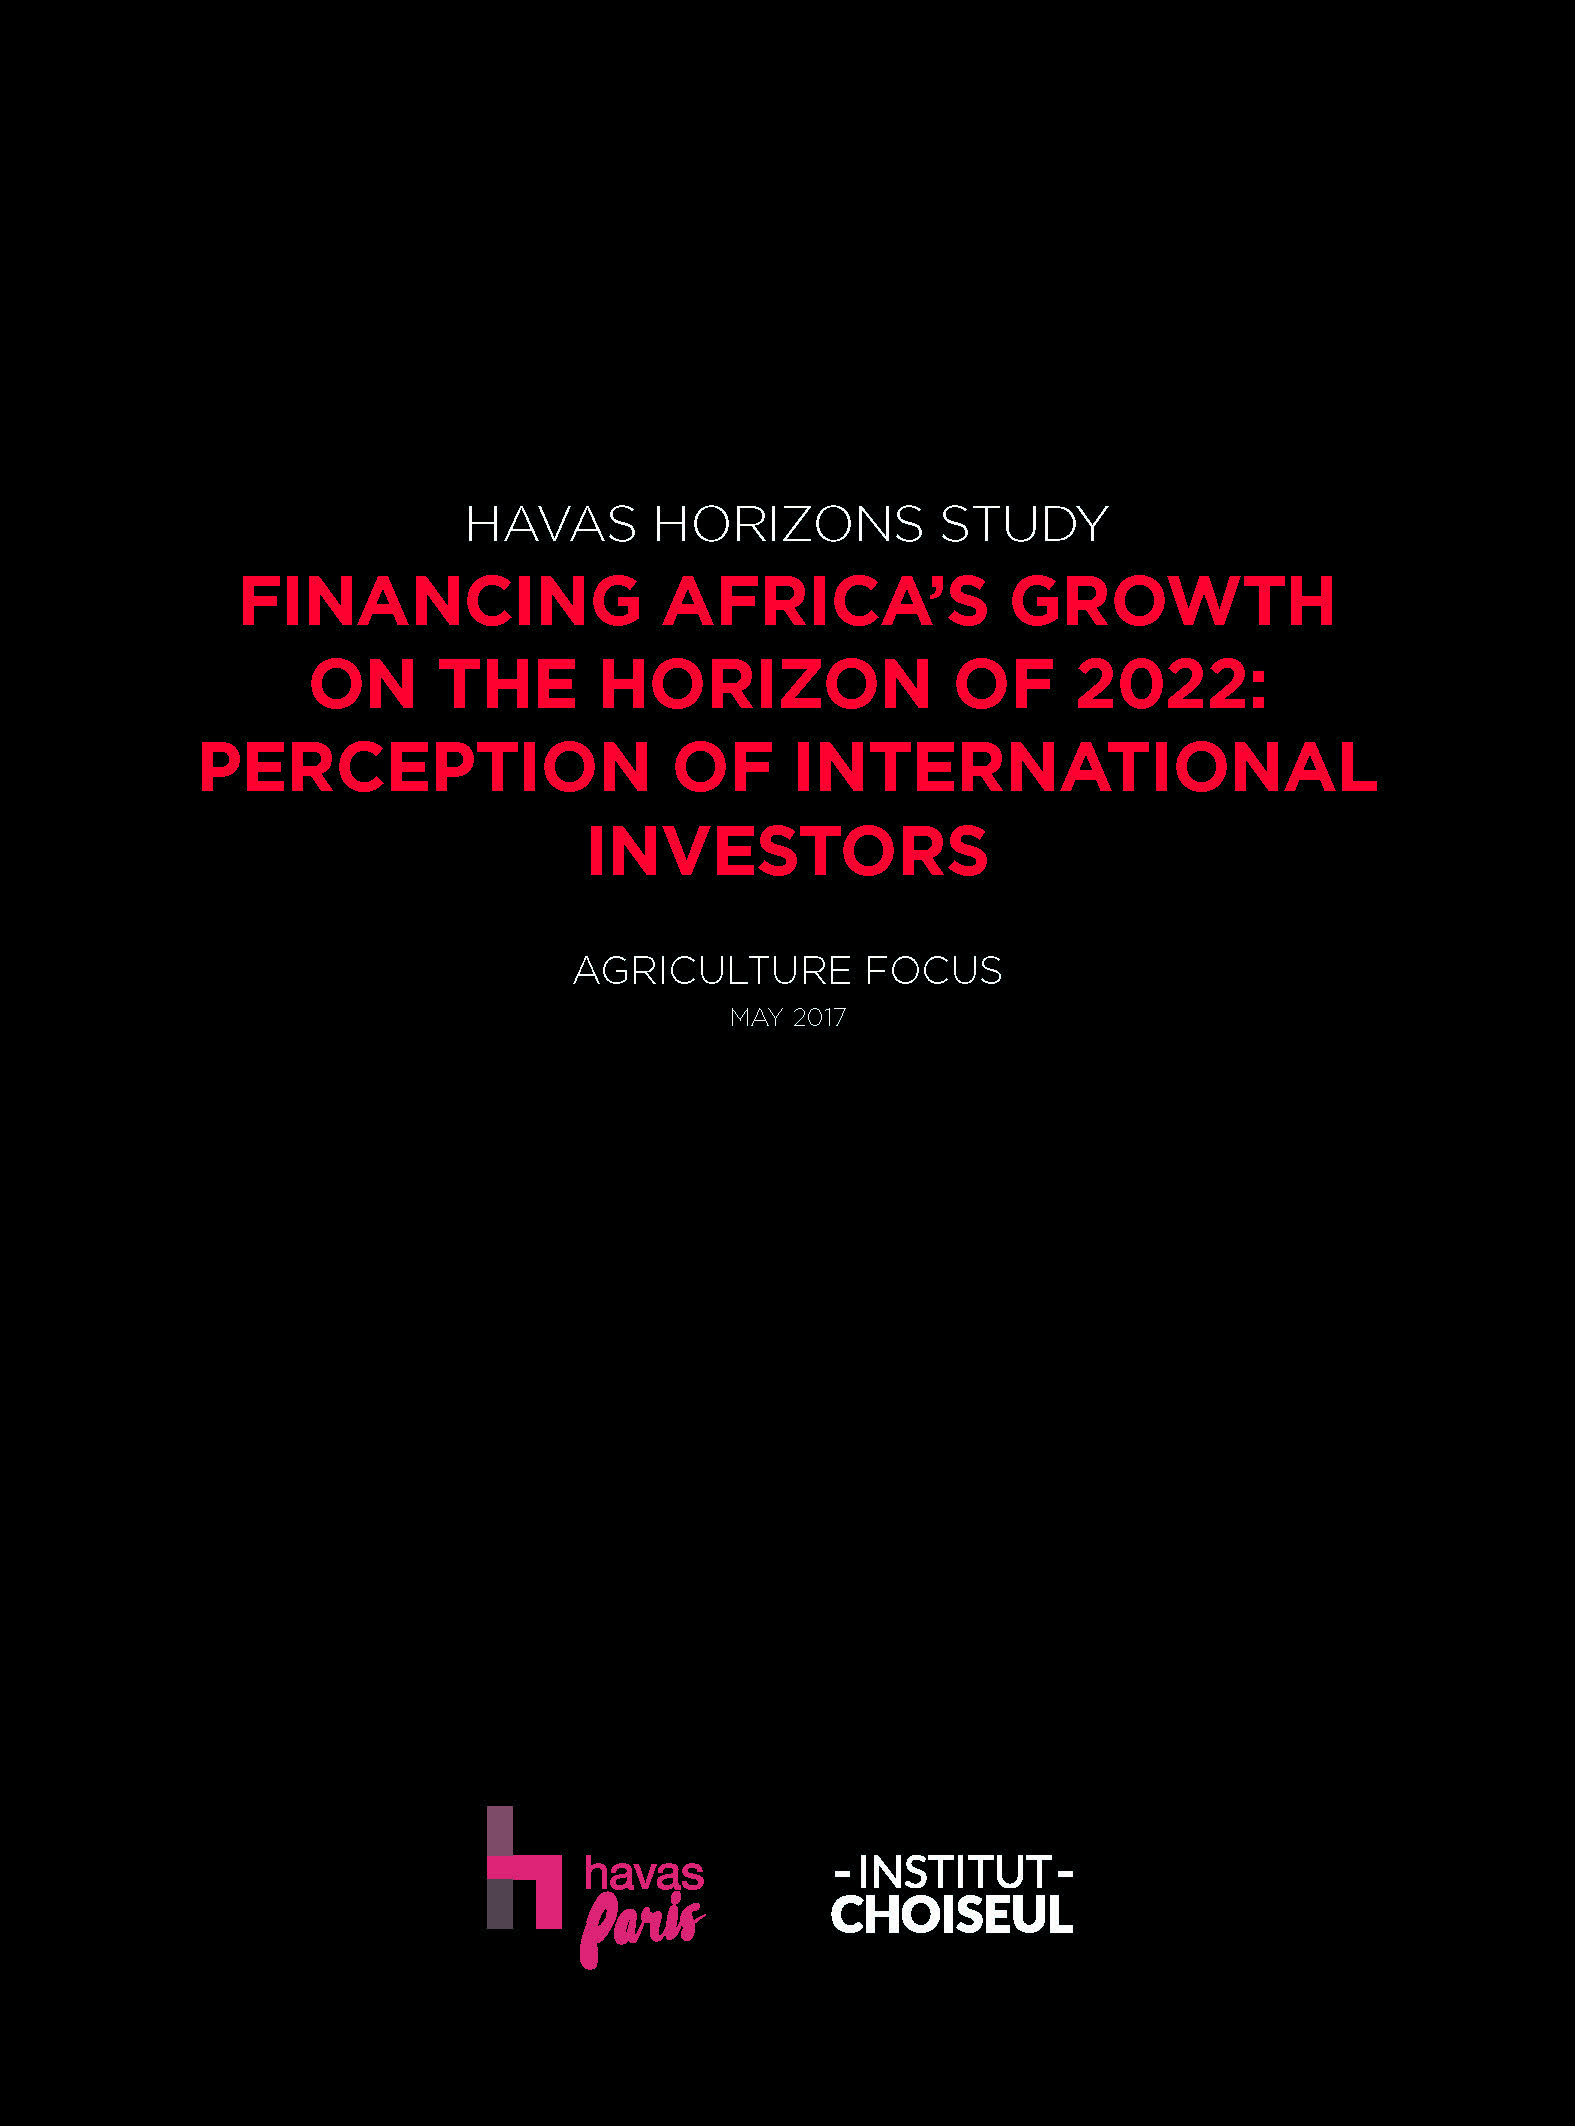 Financing Africa’s growth on the horizon of 2022